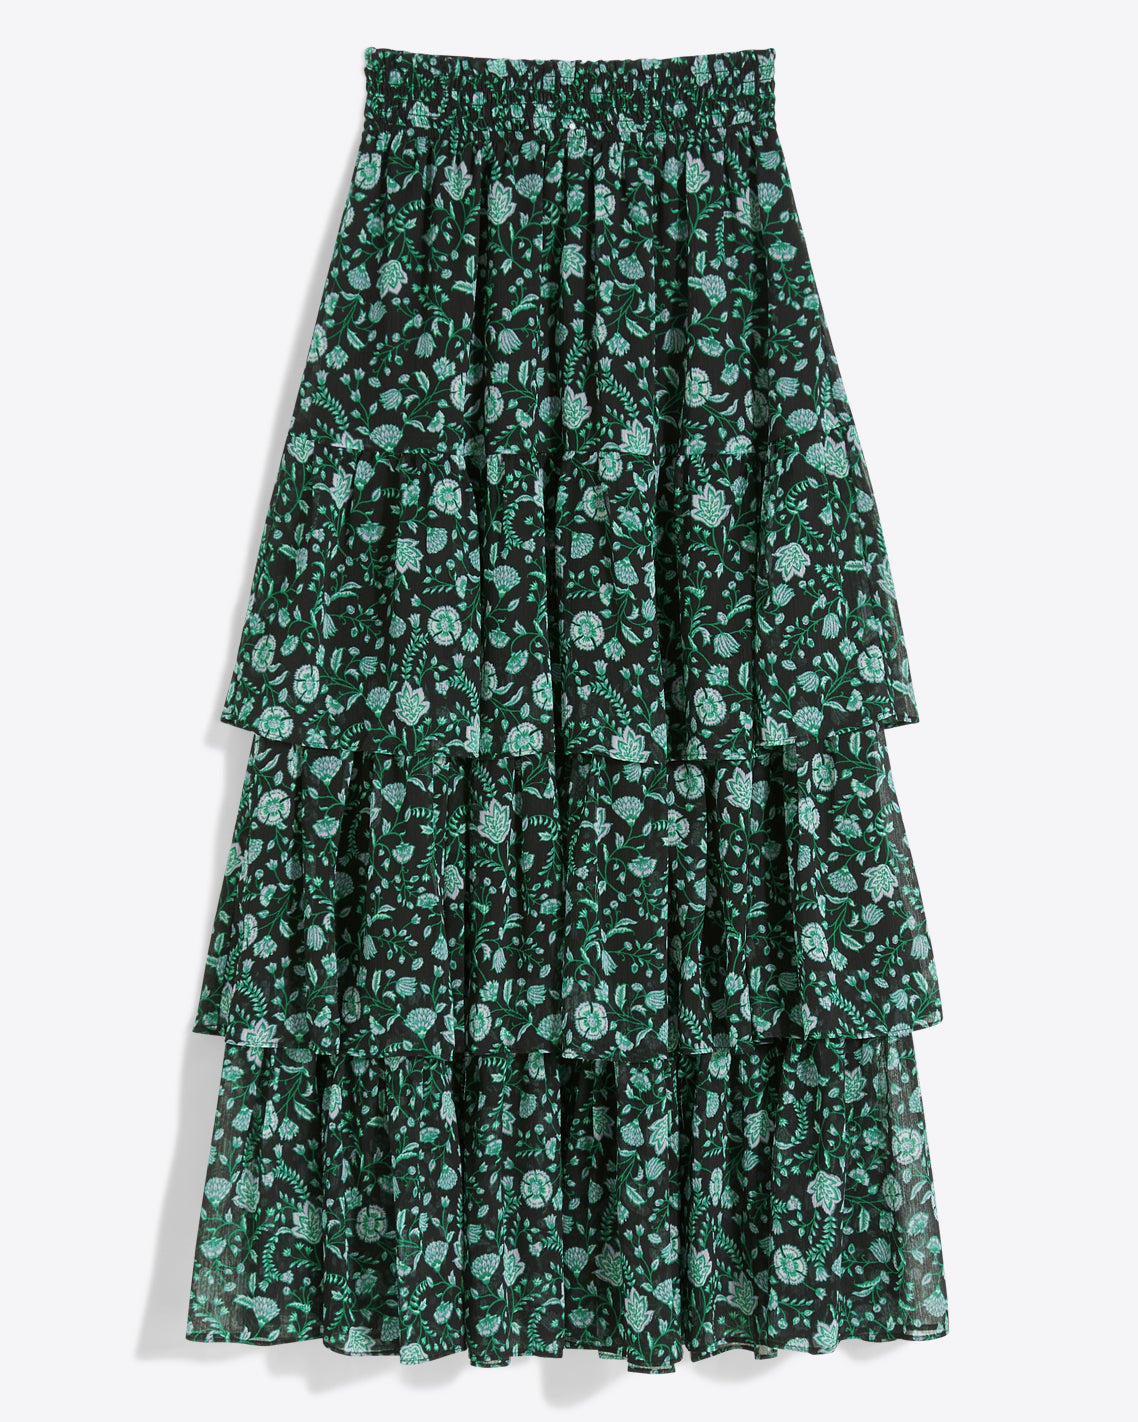 Tiered Midi Skirt in Fall Vines